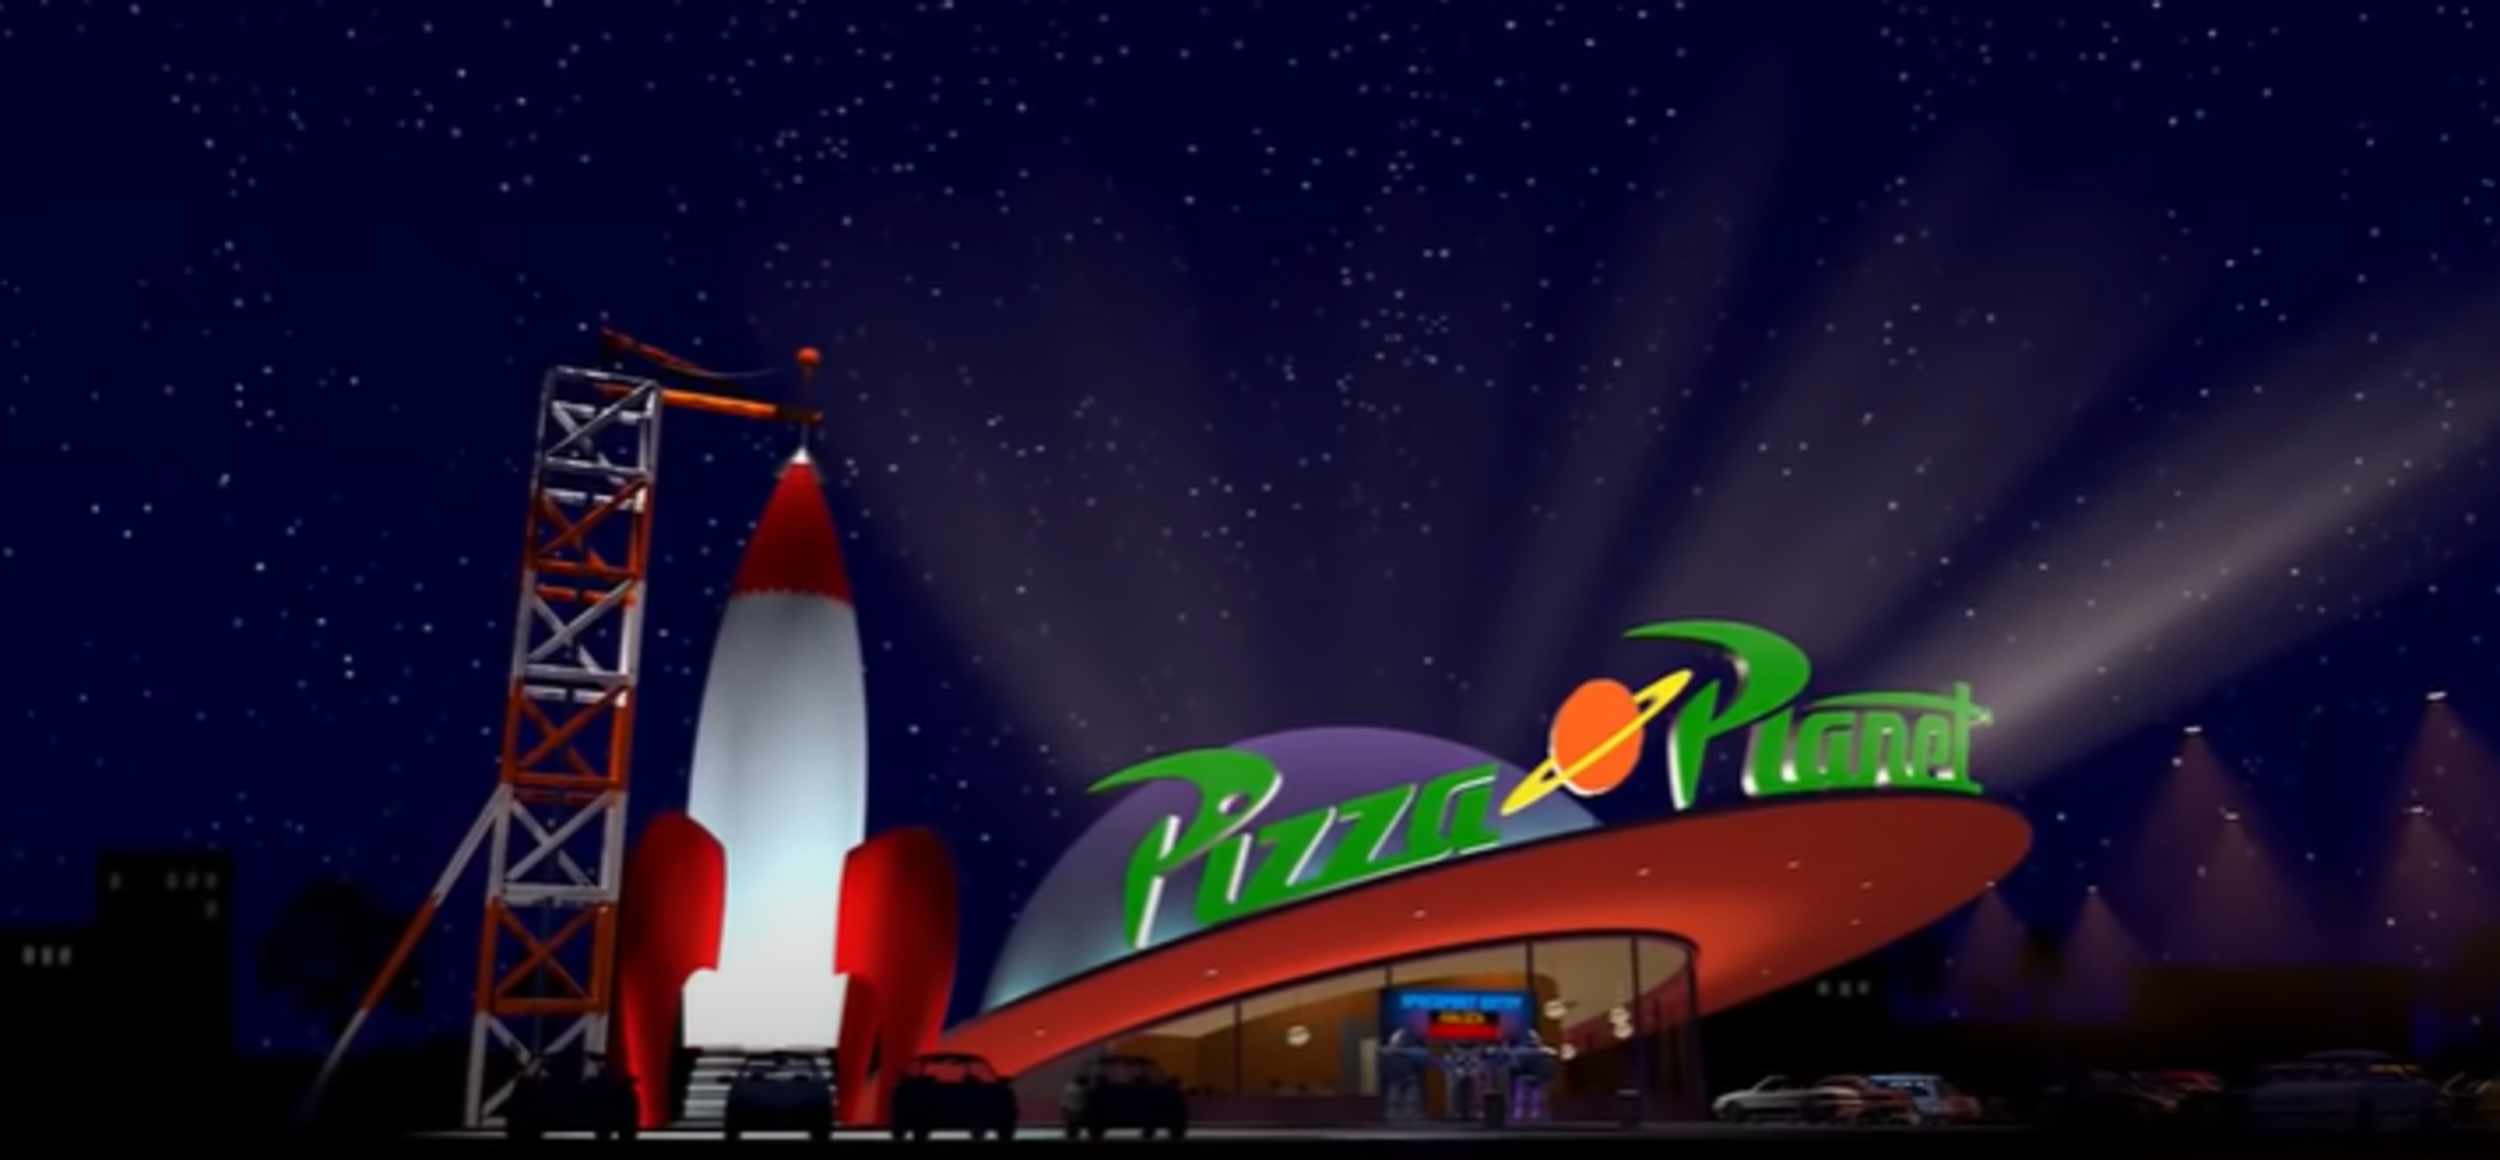 <p>The <a href="https://www.youtube.com/watch?v=uHLp_LuMWs0">preferred pizza stop for the Pixar universe</a>, and most notably, for the gang from <em>Toy Story</em>. Buzz Lightyear and Woody are big fans of the pizza place built in the shape of the planet Saturn. If the Pixar folks don't want to dine in, there is always delivery. Fun fact: According to Pixar film lore, the Planet Pizza truck has been seen in every movie made by the company — with the exception of <em>The Incredibles.</em></p>